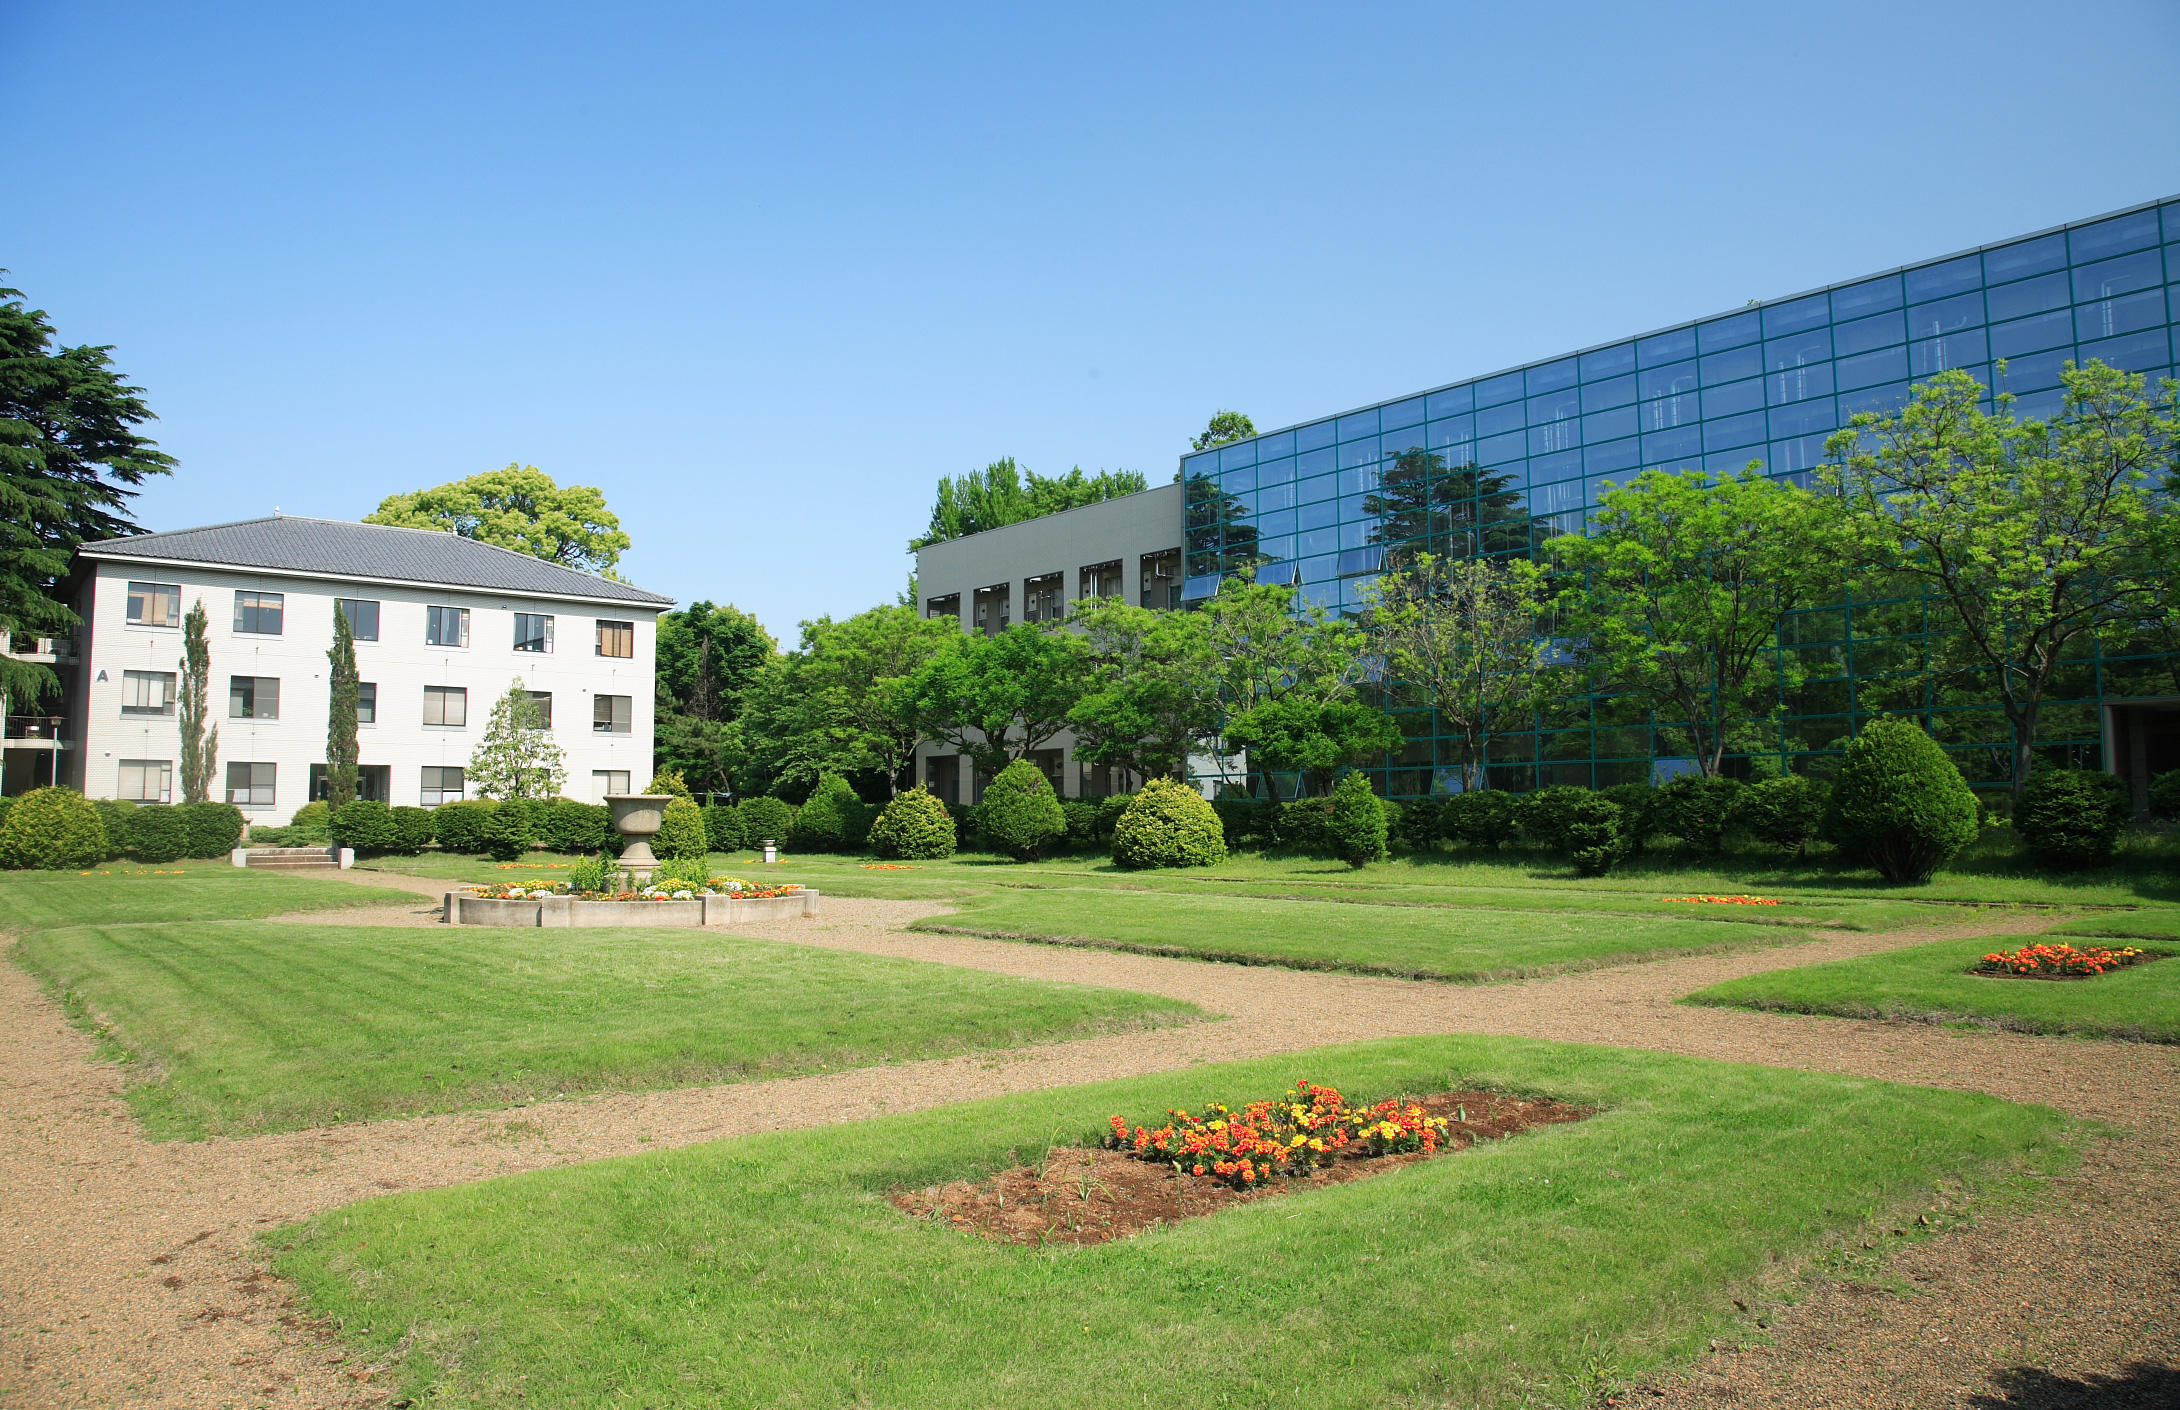 Faculty of Horticulture